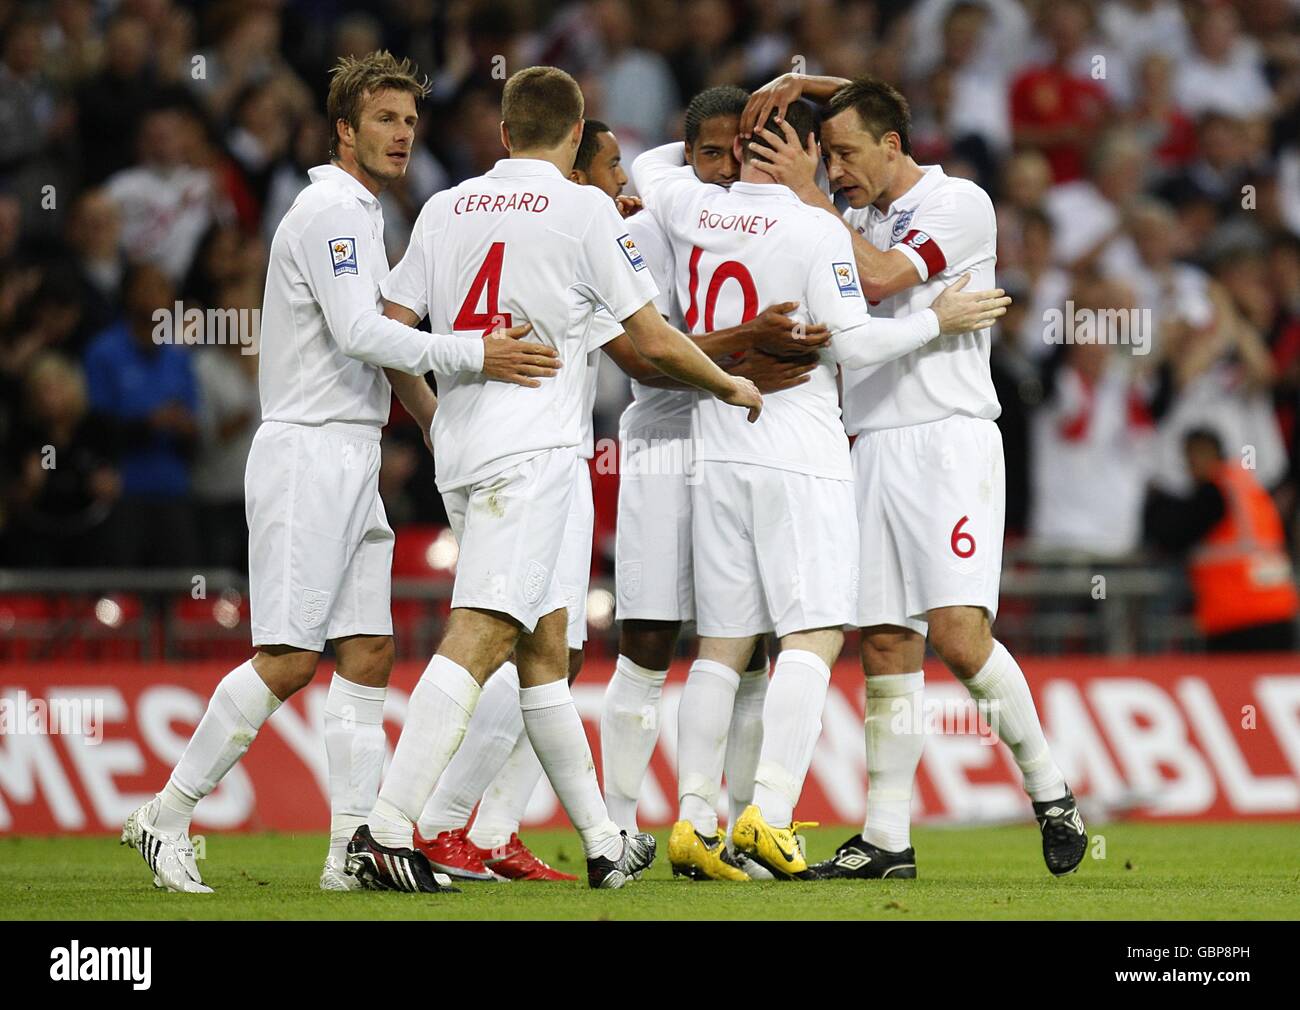 Soccer - Fifa World Cup 2010 - Qualifying Round - Group Six - England v Andorra - Wembley Stadium. England's Wayne Rooney (right from centre) celebrates with team mate John Terry (far right) after scoring his sides third goal of the game. Stock Photo